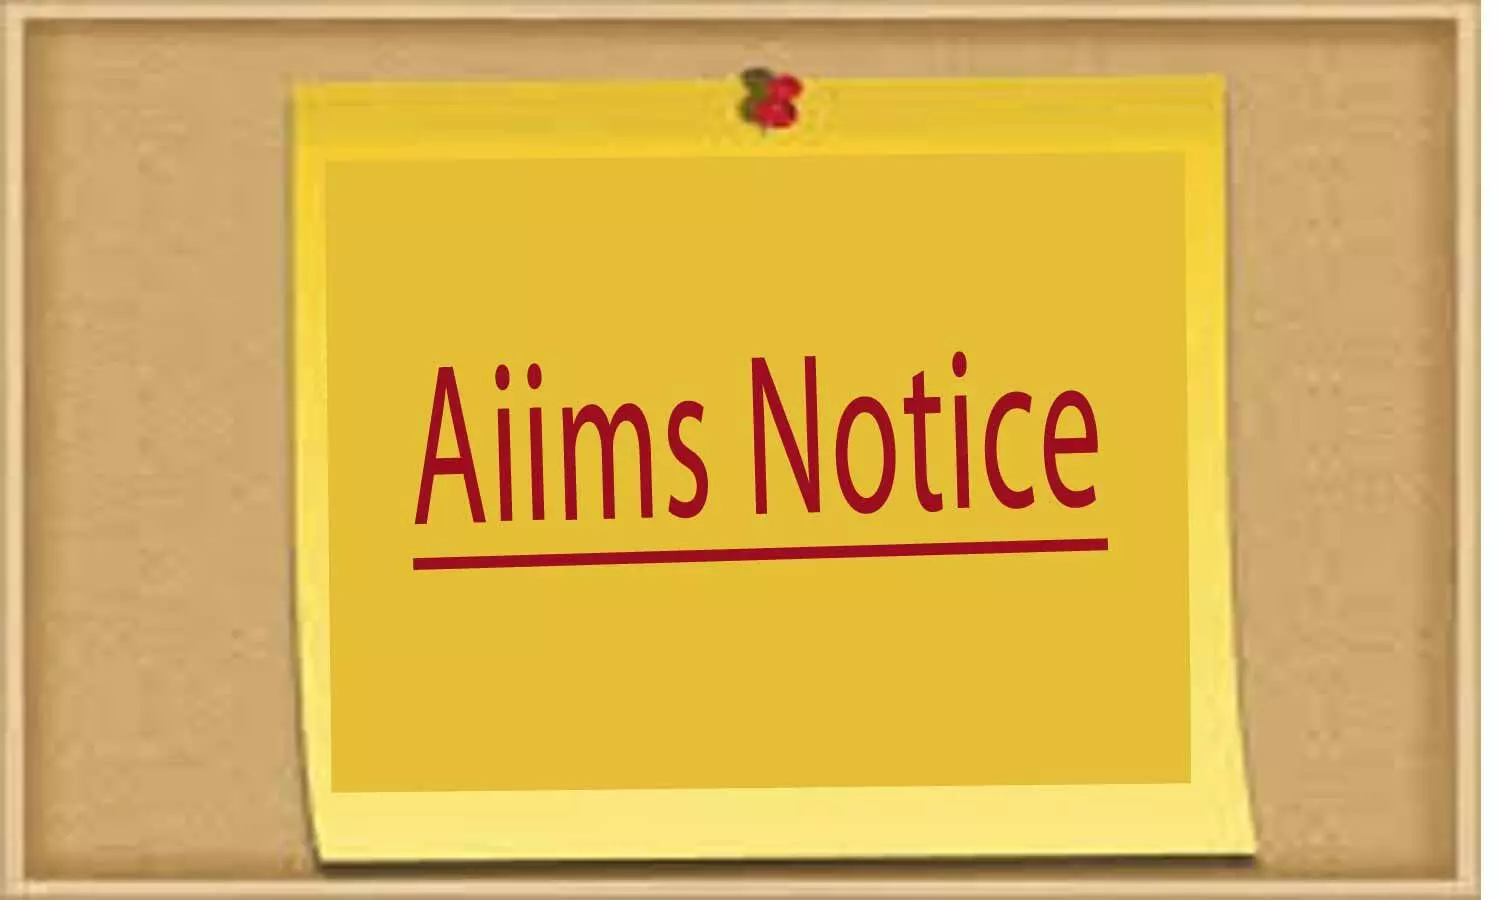 AIIMS reschedules final status of application for BSc Nursing Hons, BSc, MSc courses 2020